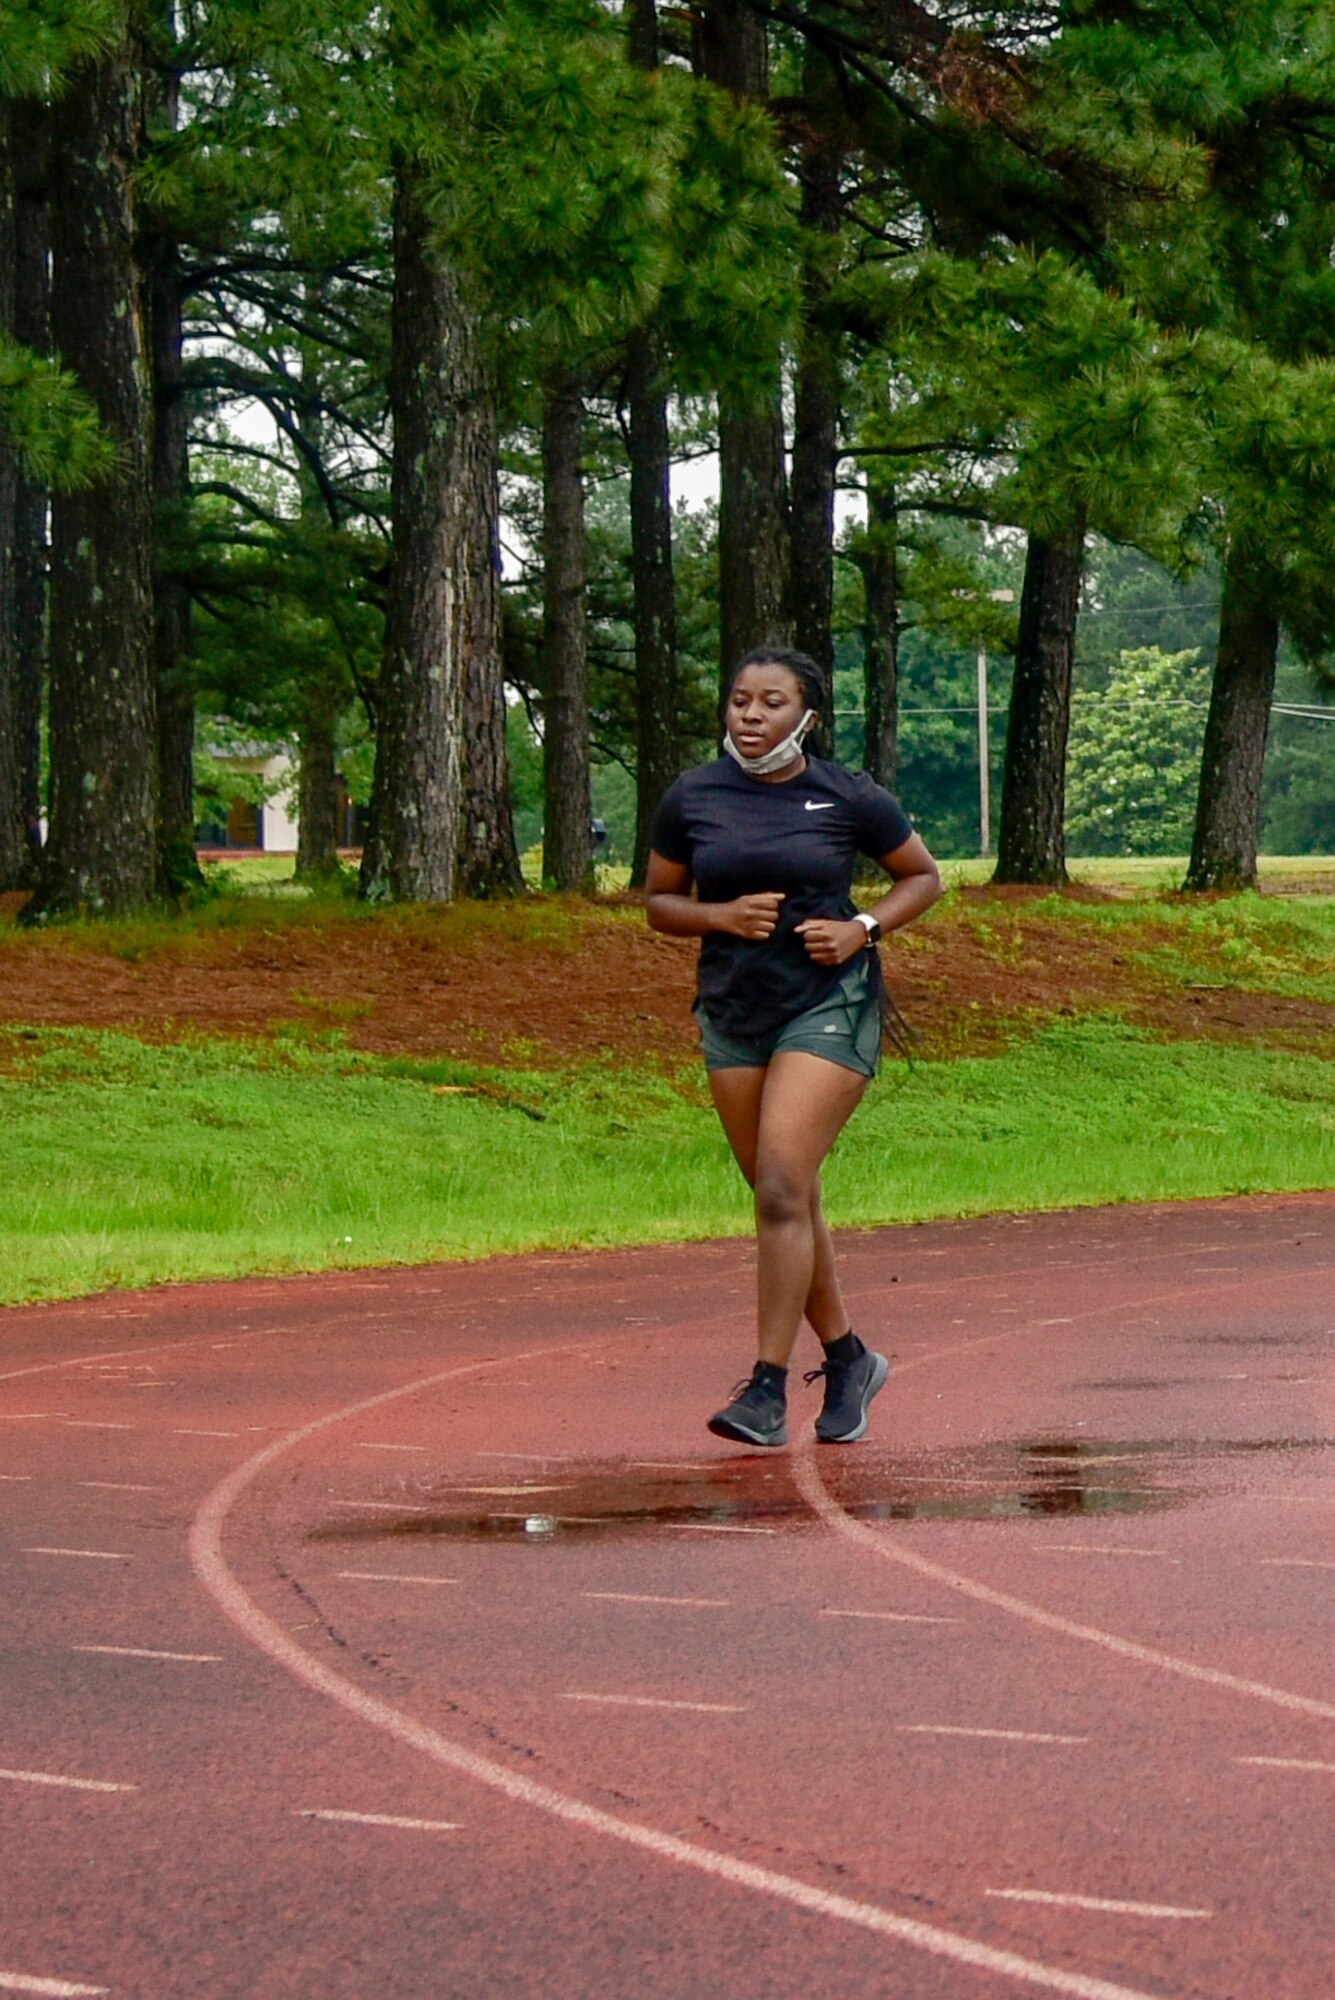 Akorfa Domey, a trainee in the 913th Airlift Group’s Development and Training Flight, runs during the Physical Training portion of the drill weekend. Domey decided to join the Air Force Reserve after she and her family moved to Arkansas from Ghana two years ago. (U.S. Air Force Photo by Senior Airman Kalee Sexton)